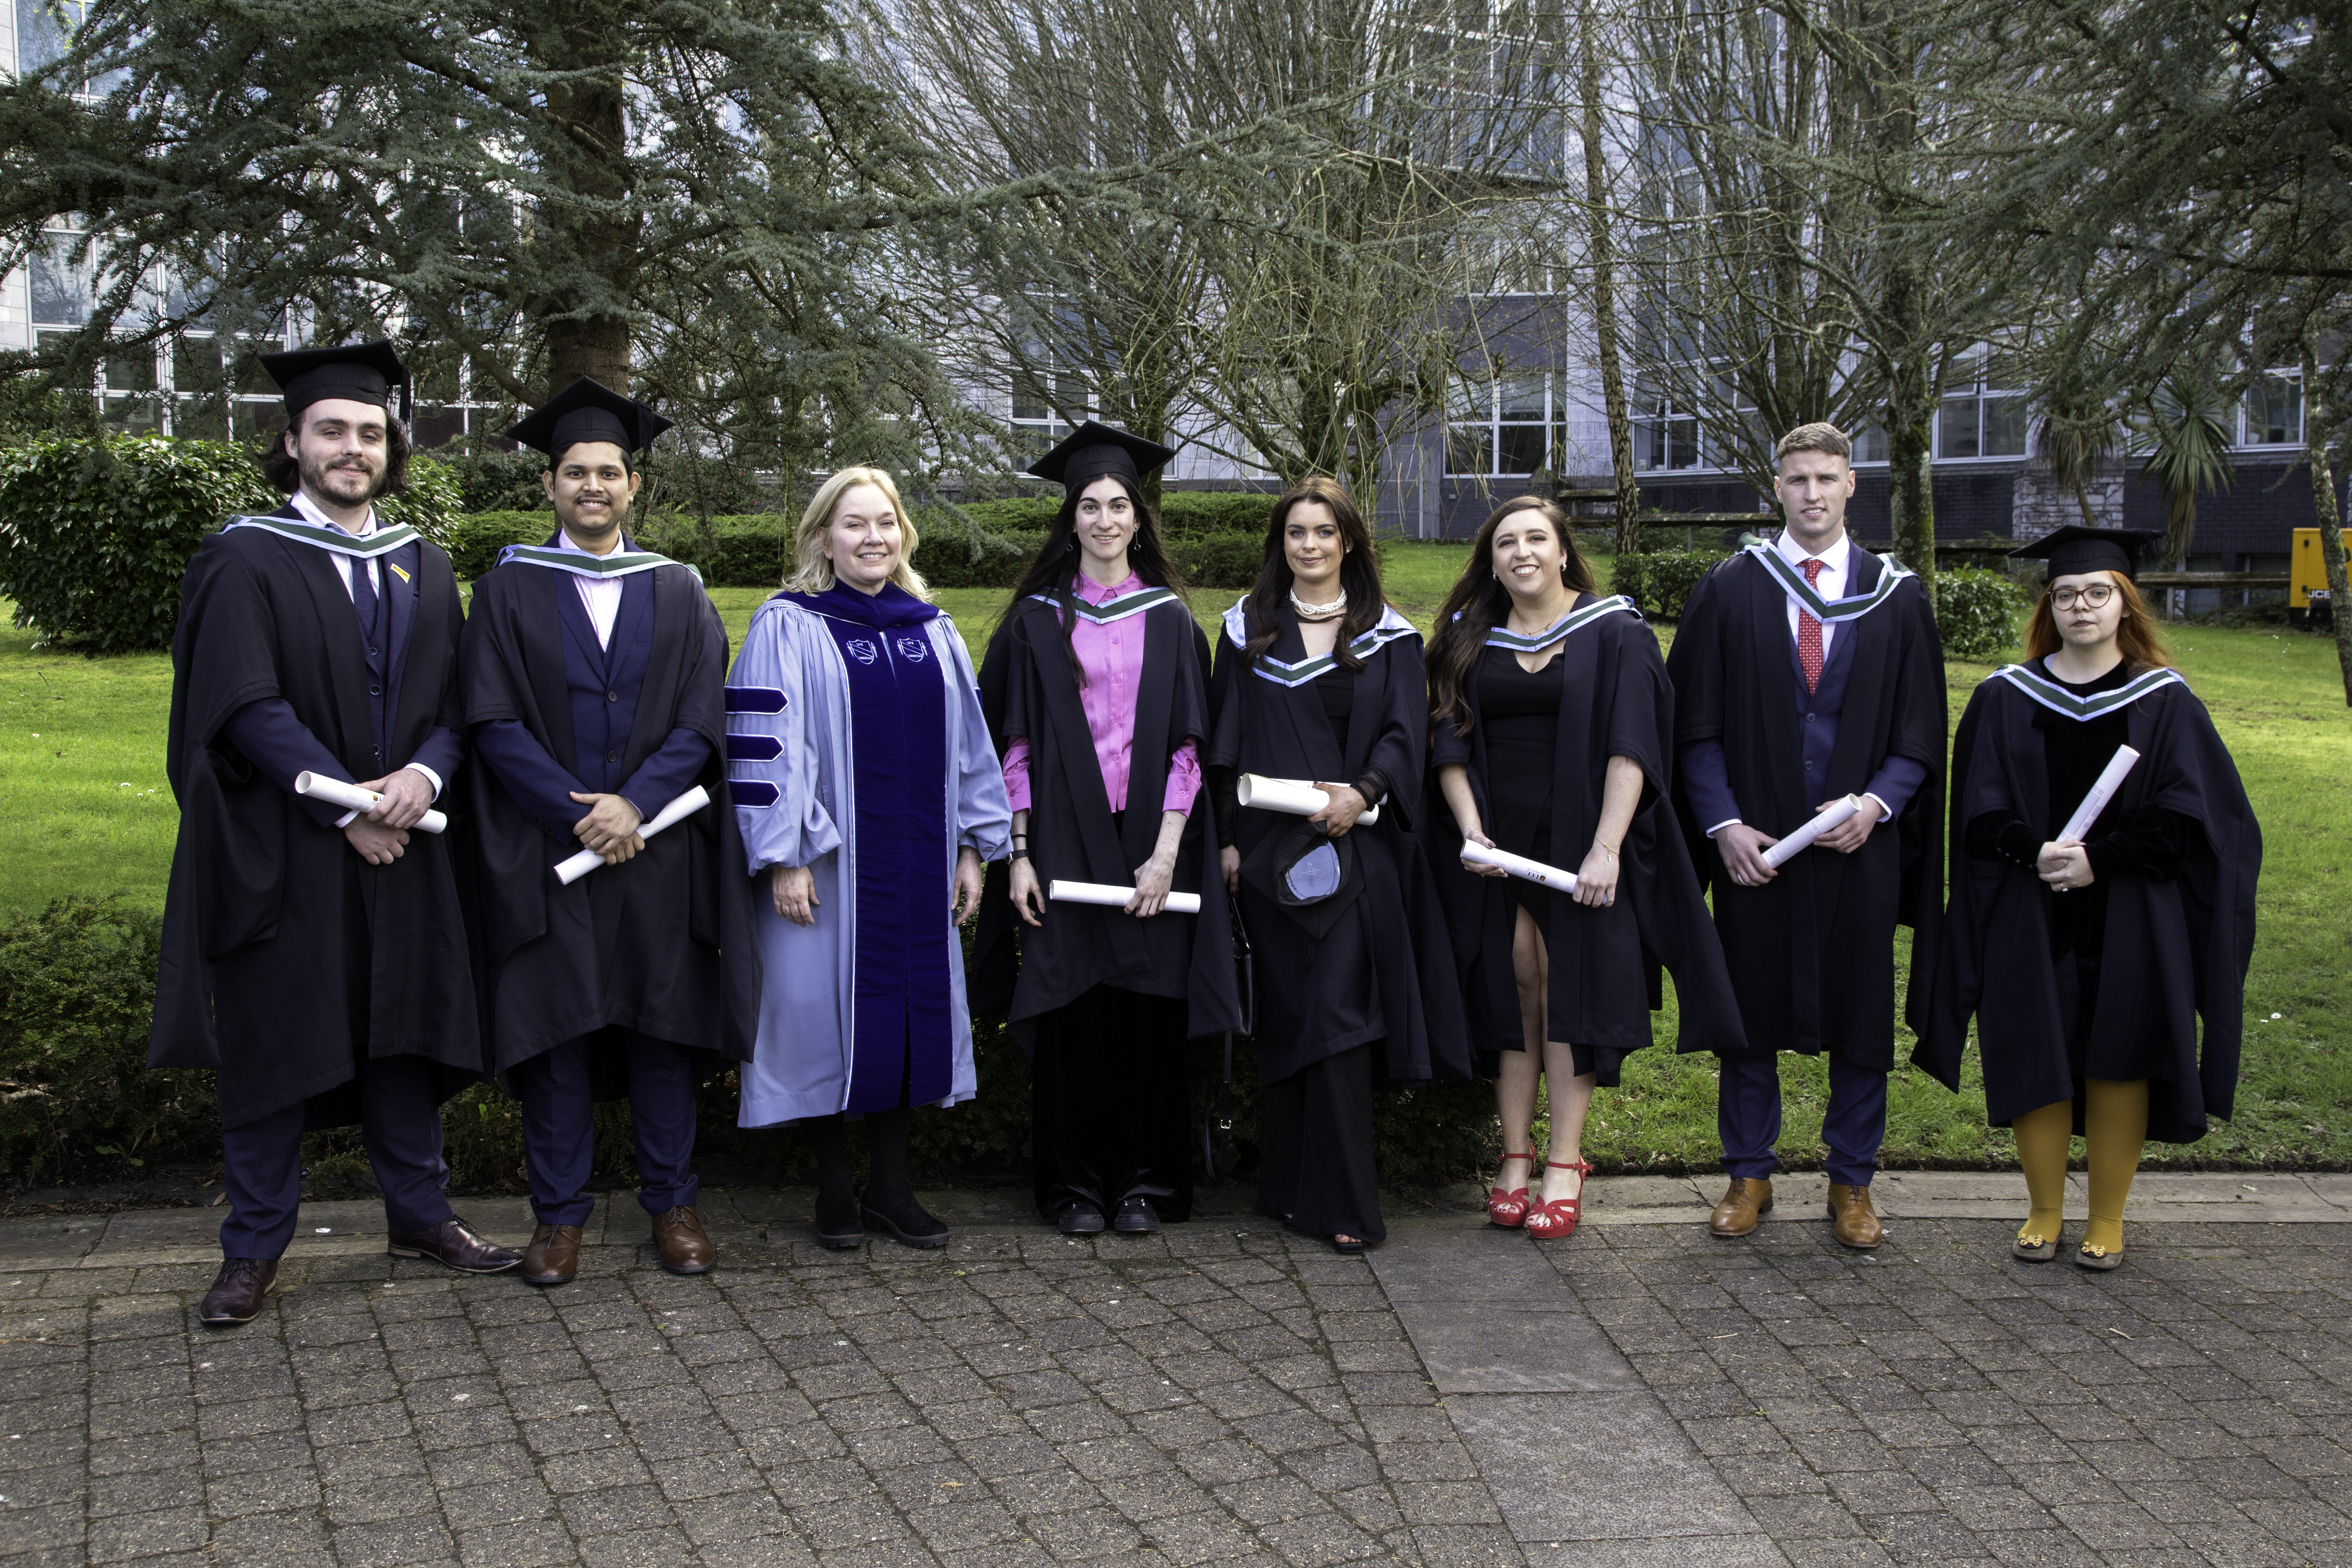 Pictured (L) to (R): Alan Deery, Prakash Nath, Dr Kellie Dean (Programme Director), Nerea Hernández Egido, Lauryn Hennessy, Rebecca O’Connor, Ciaran Flynn, and Alicja Zablotna. Not pictured was Caoimhe O’Leary Pearce. 